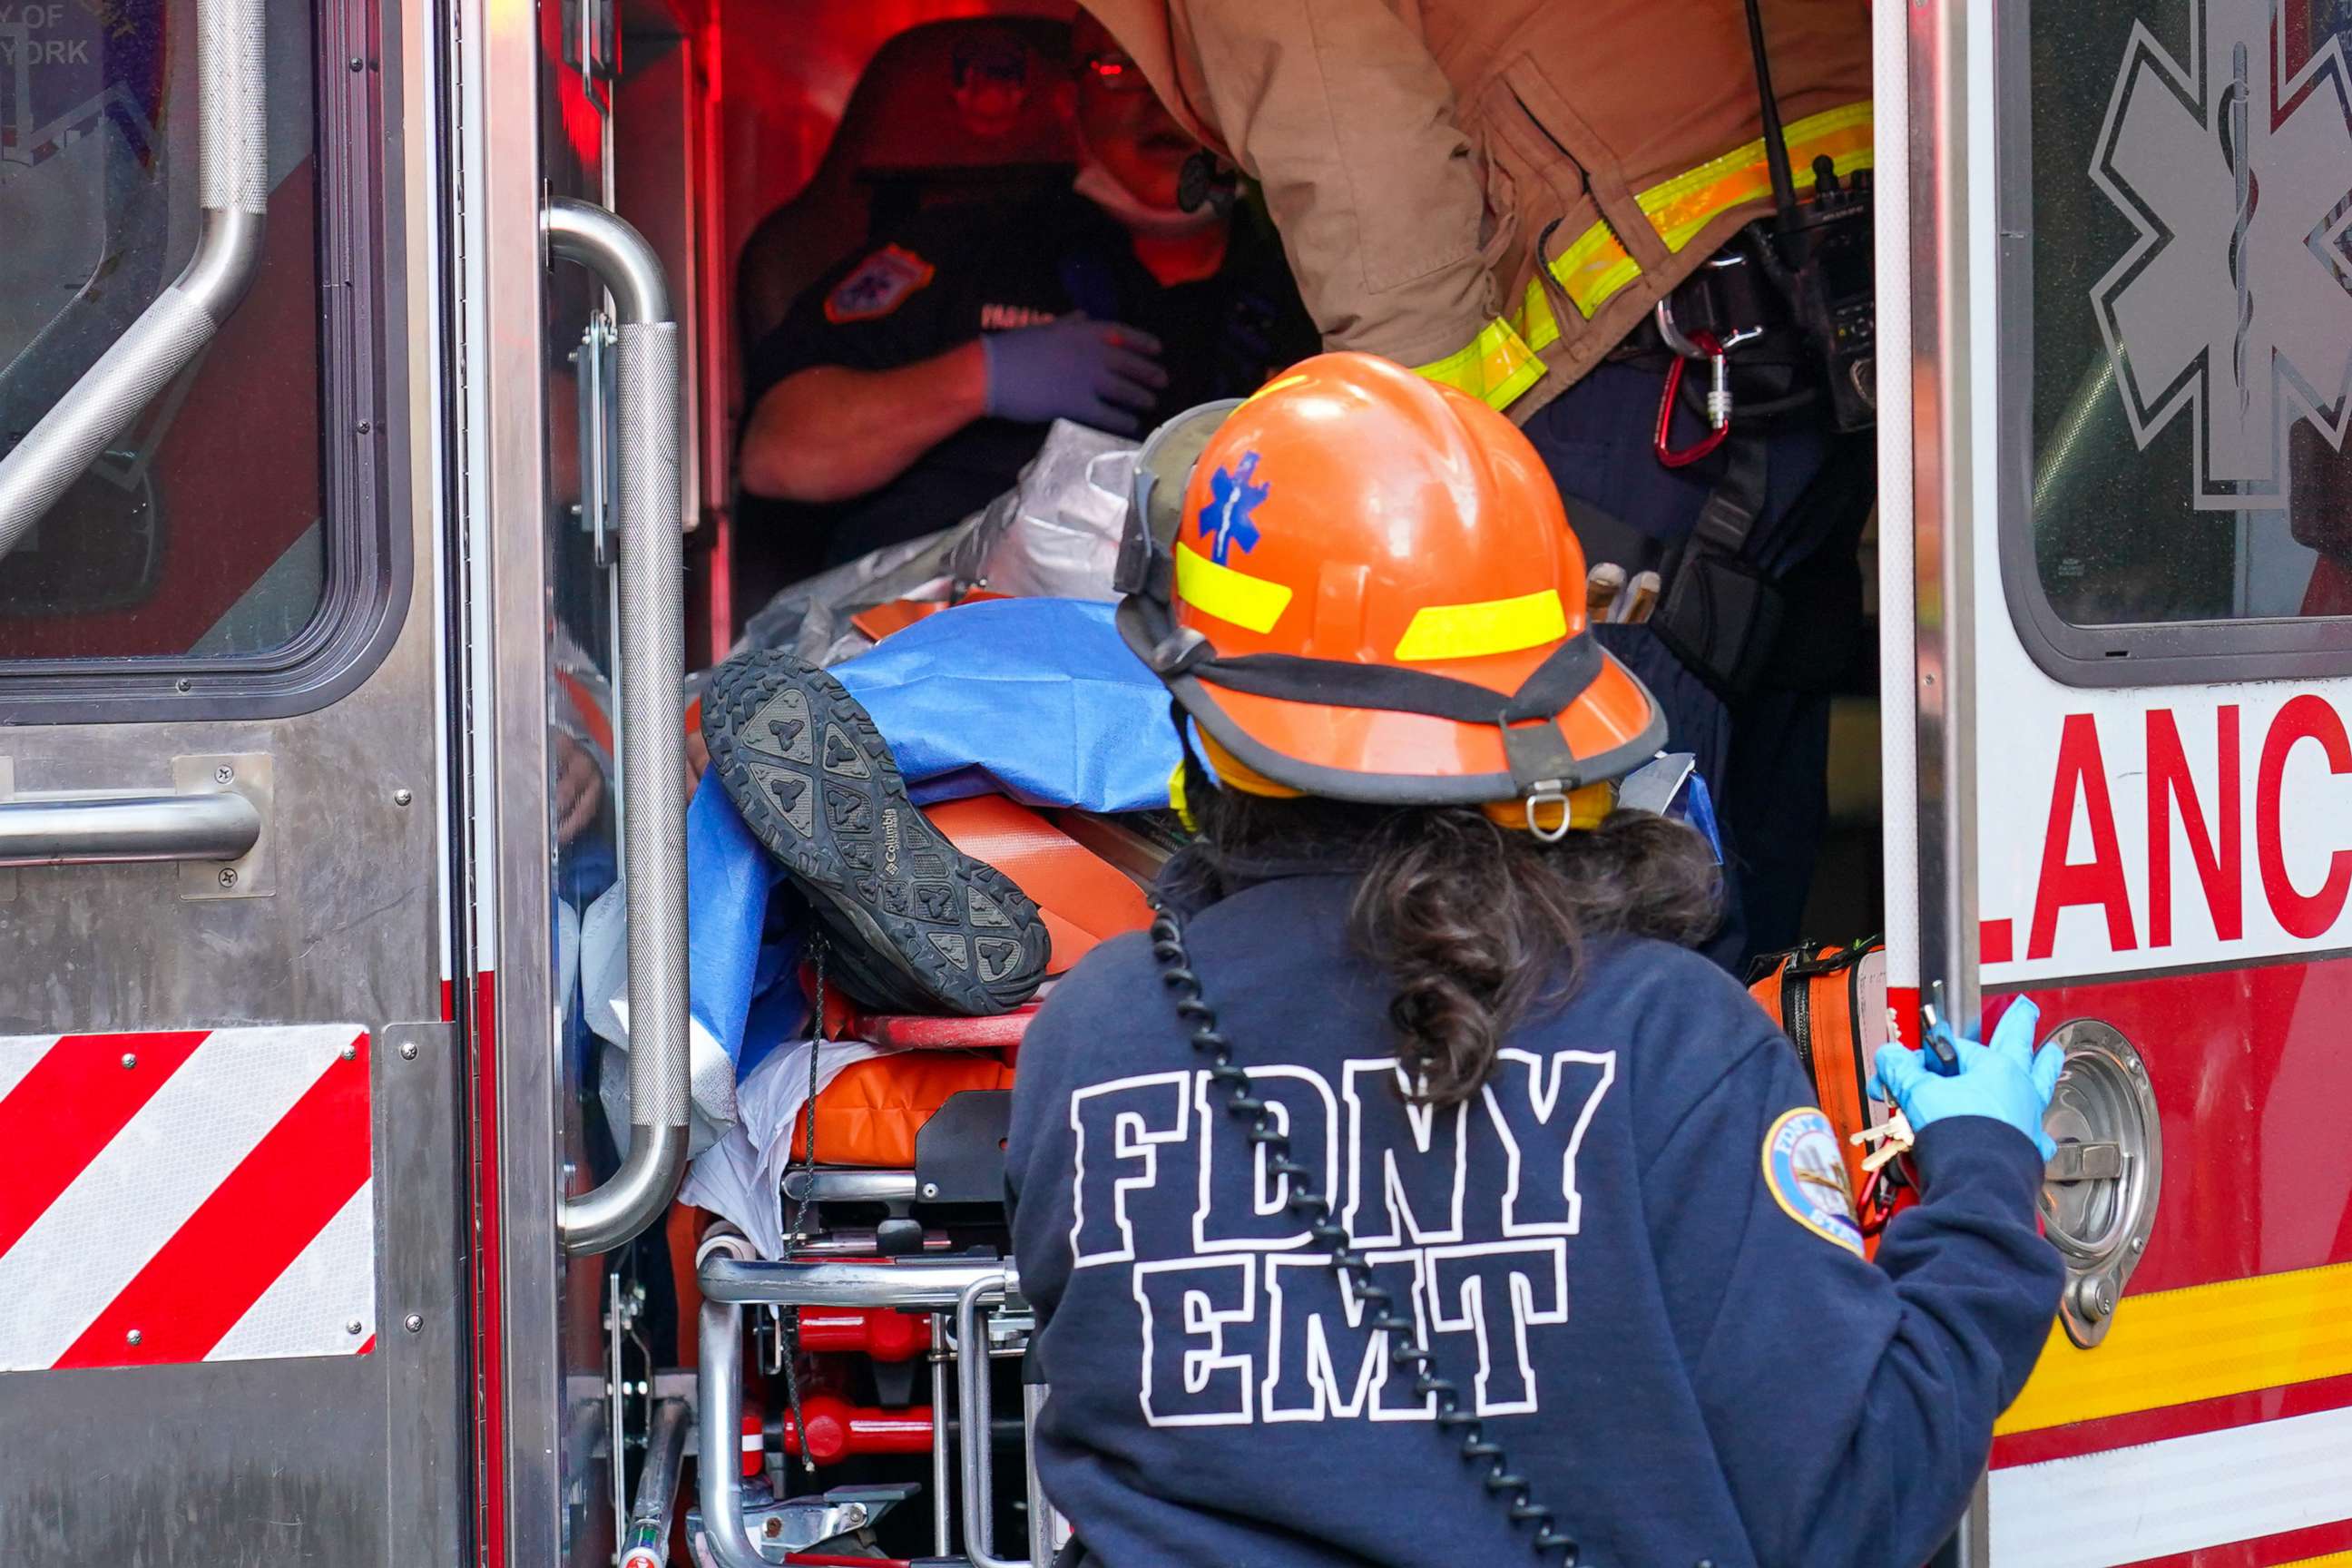 PHOTO: An injured worker is brought to a waiting FDNY ambulance, Nov. 14, 2020.